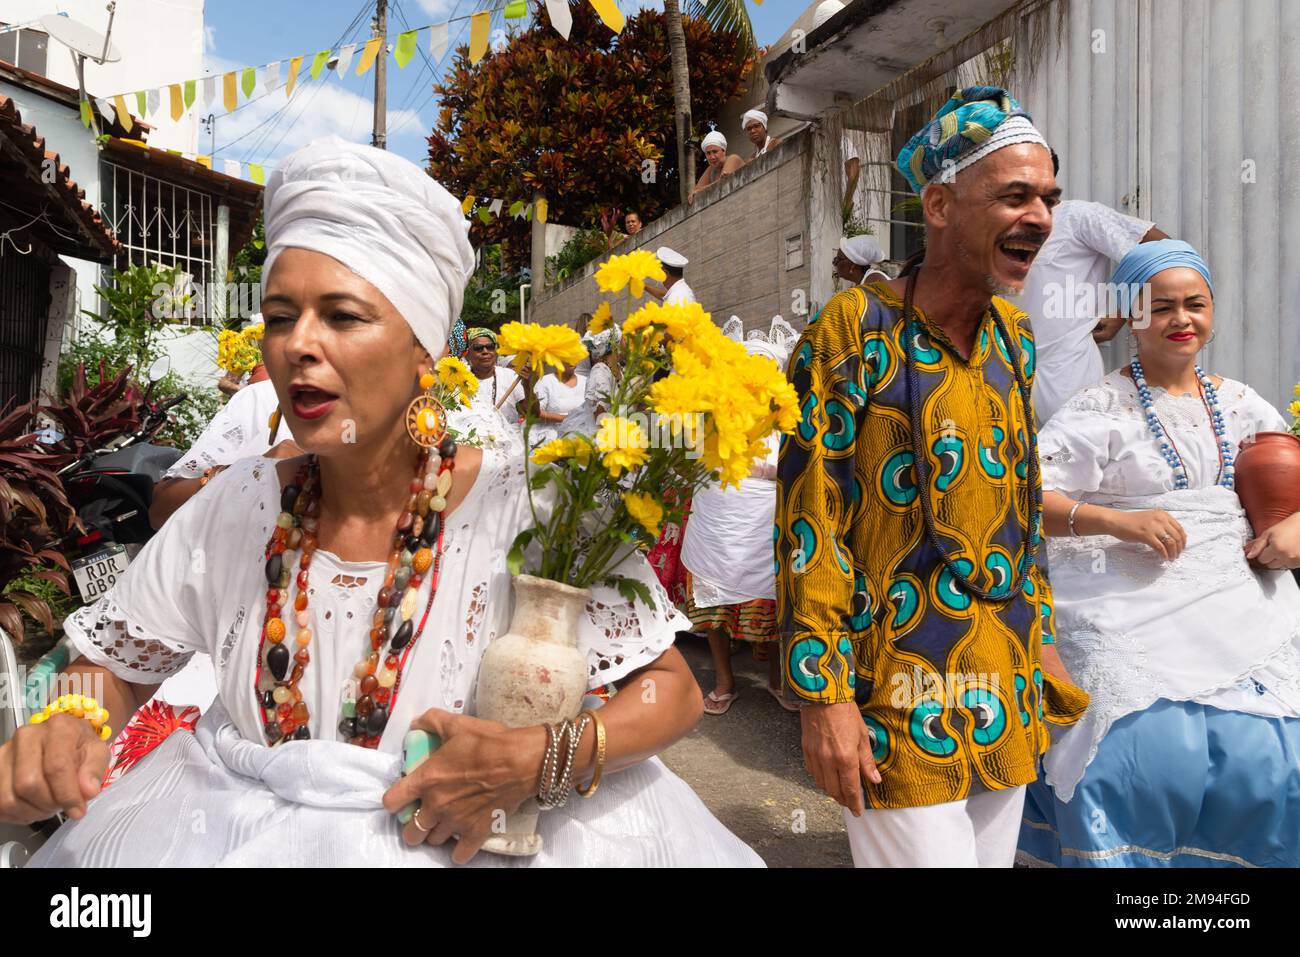 A group of Candomble members dancing and singing at religious house in Bom Jesus dos Pobre district Stock Photo